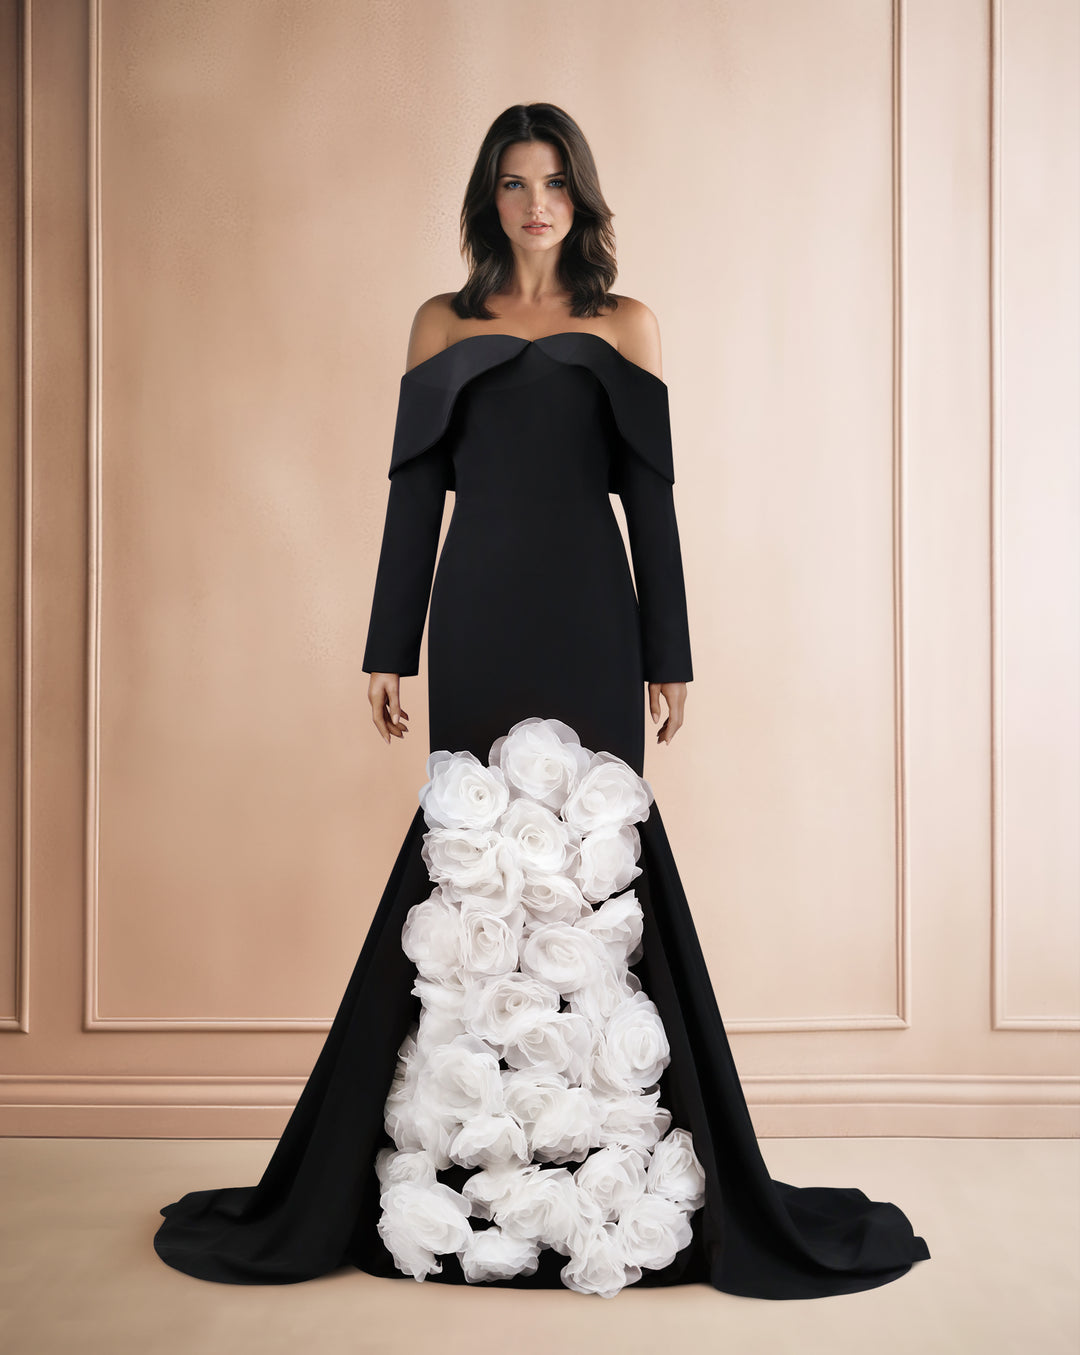 Strapless black dress with 3D flowers and a train